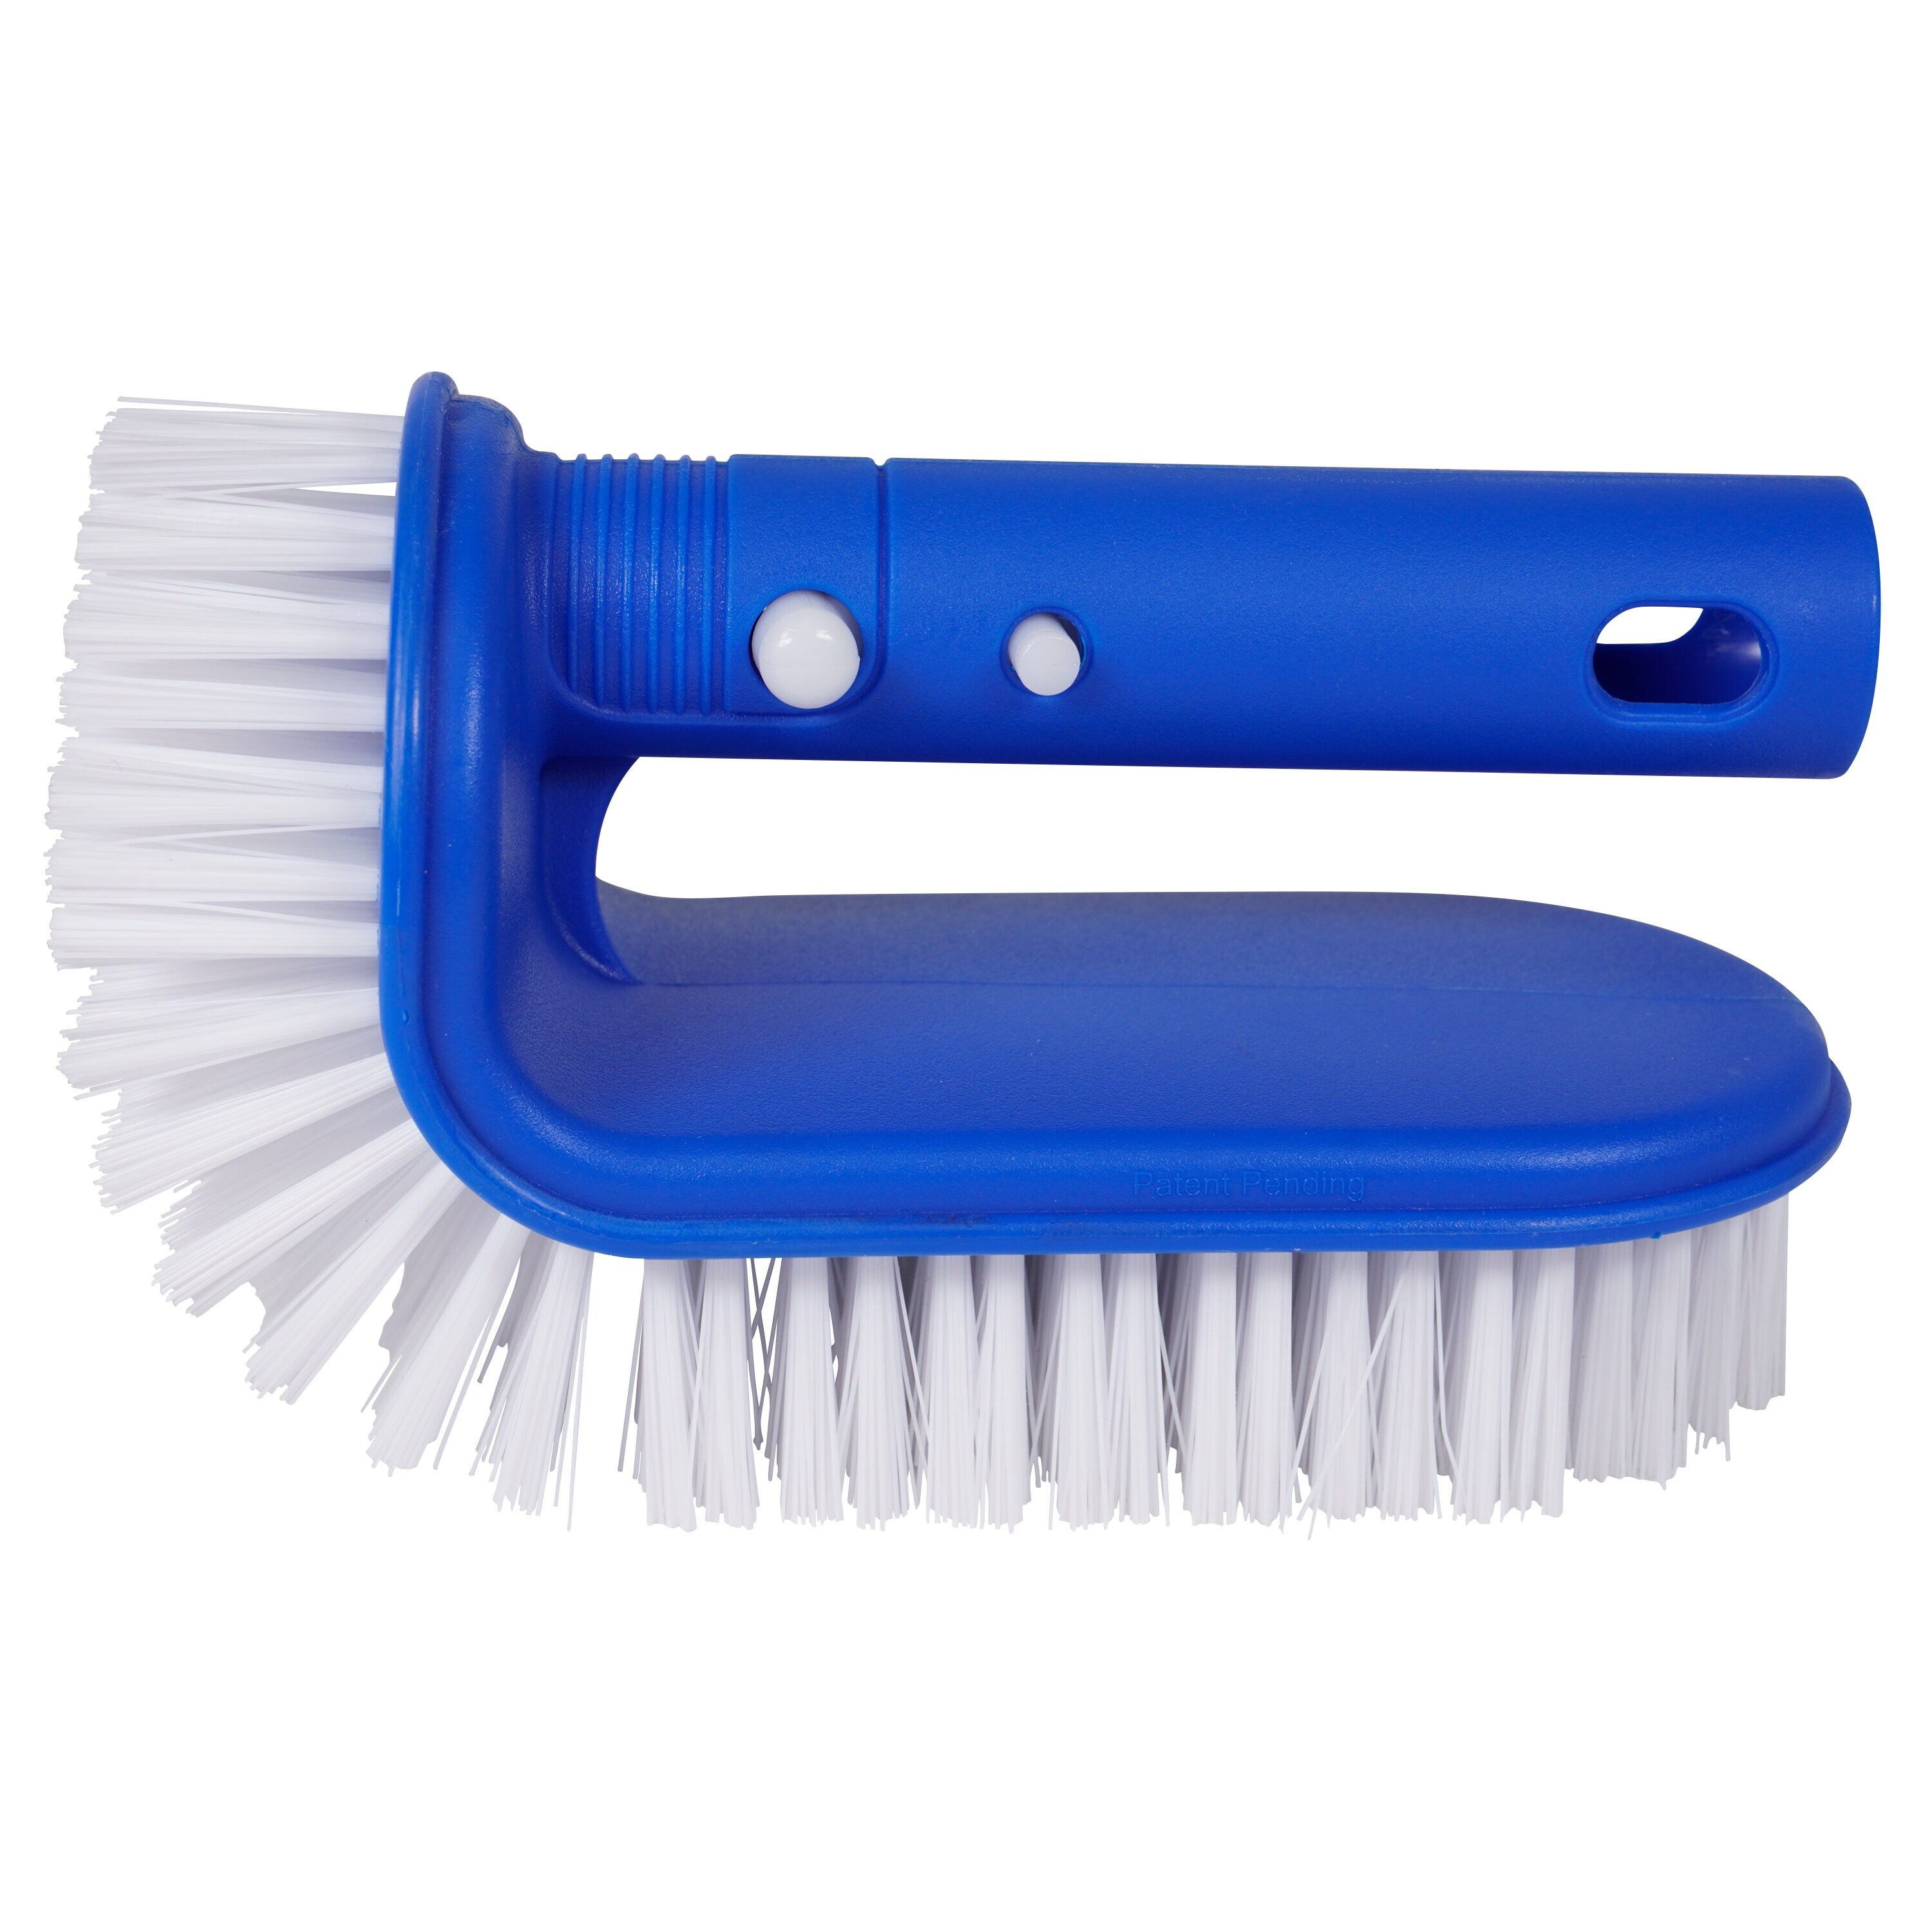 Noa Store Pool Step & Corner Brush  Cleaning Brush for Bathroom, Tile,  Pools & More, 5.12 H 11.42 L 8.46 W - Fry's Food Stores